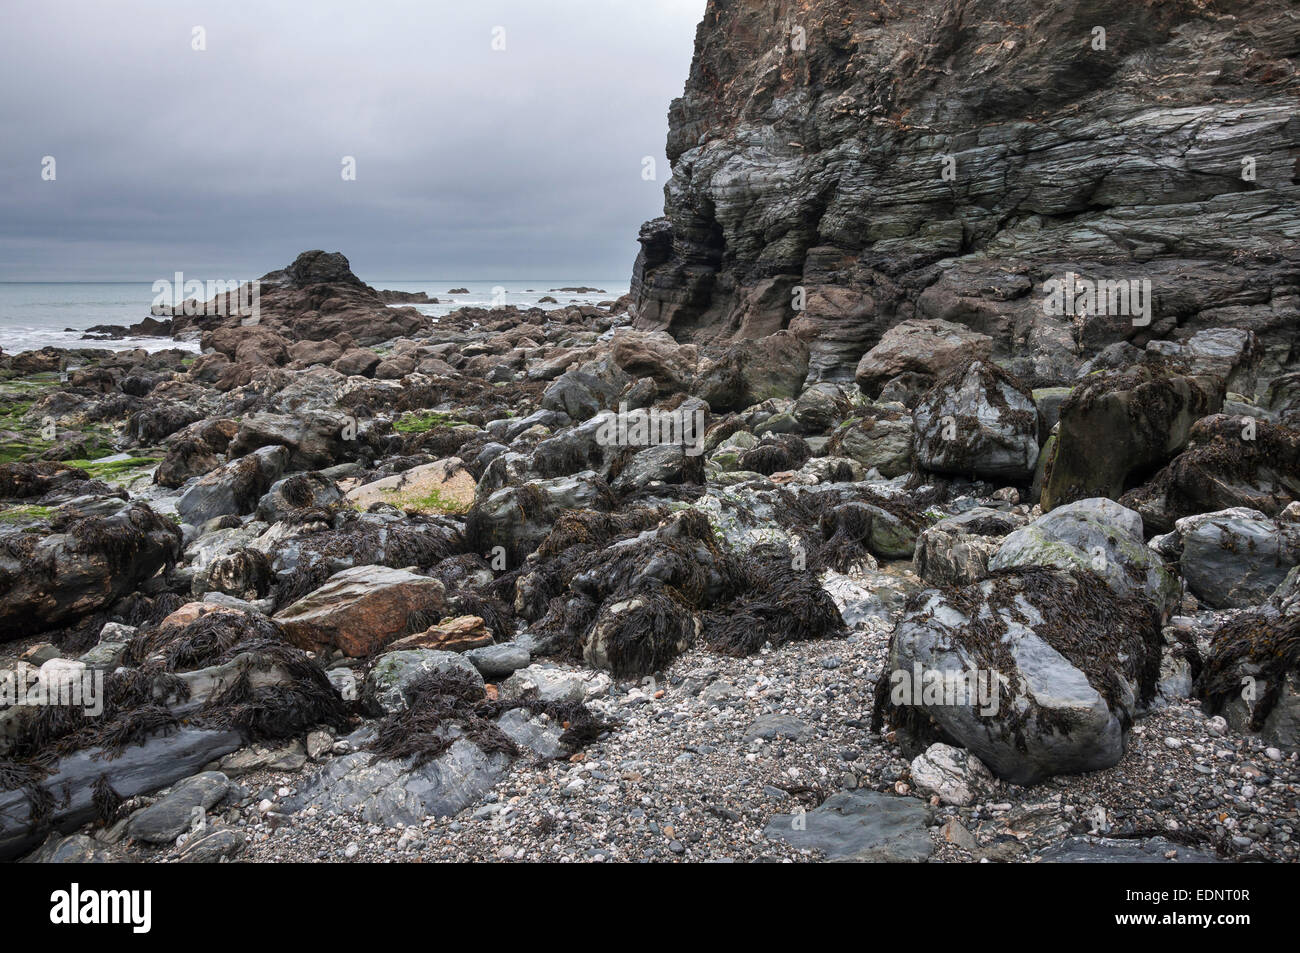 Rocky shoreline at Trevaunance cove near St Agnes, Cornwall. View over seaweed covered rocks to the sea. Stock Photo